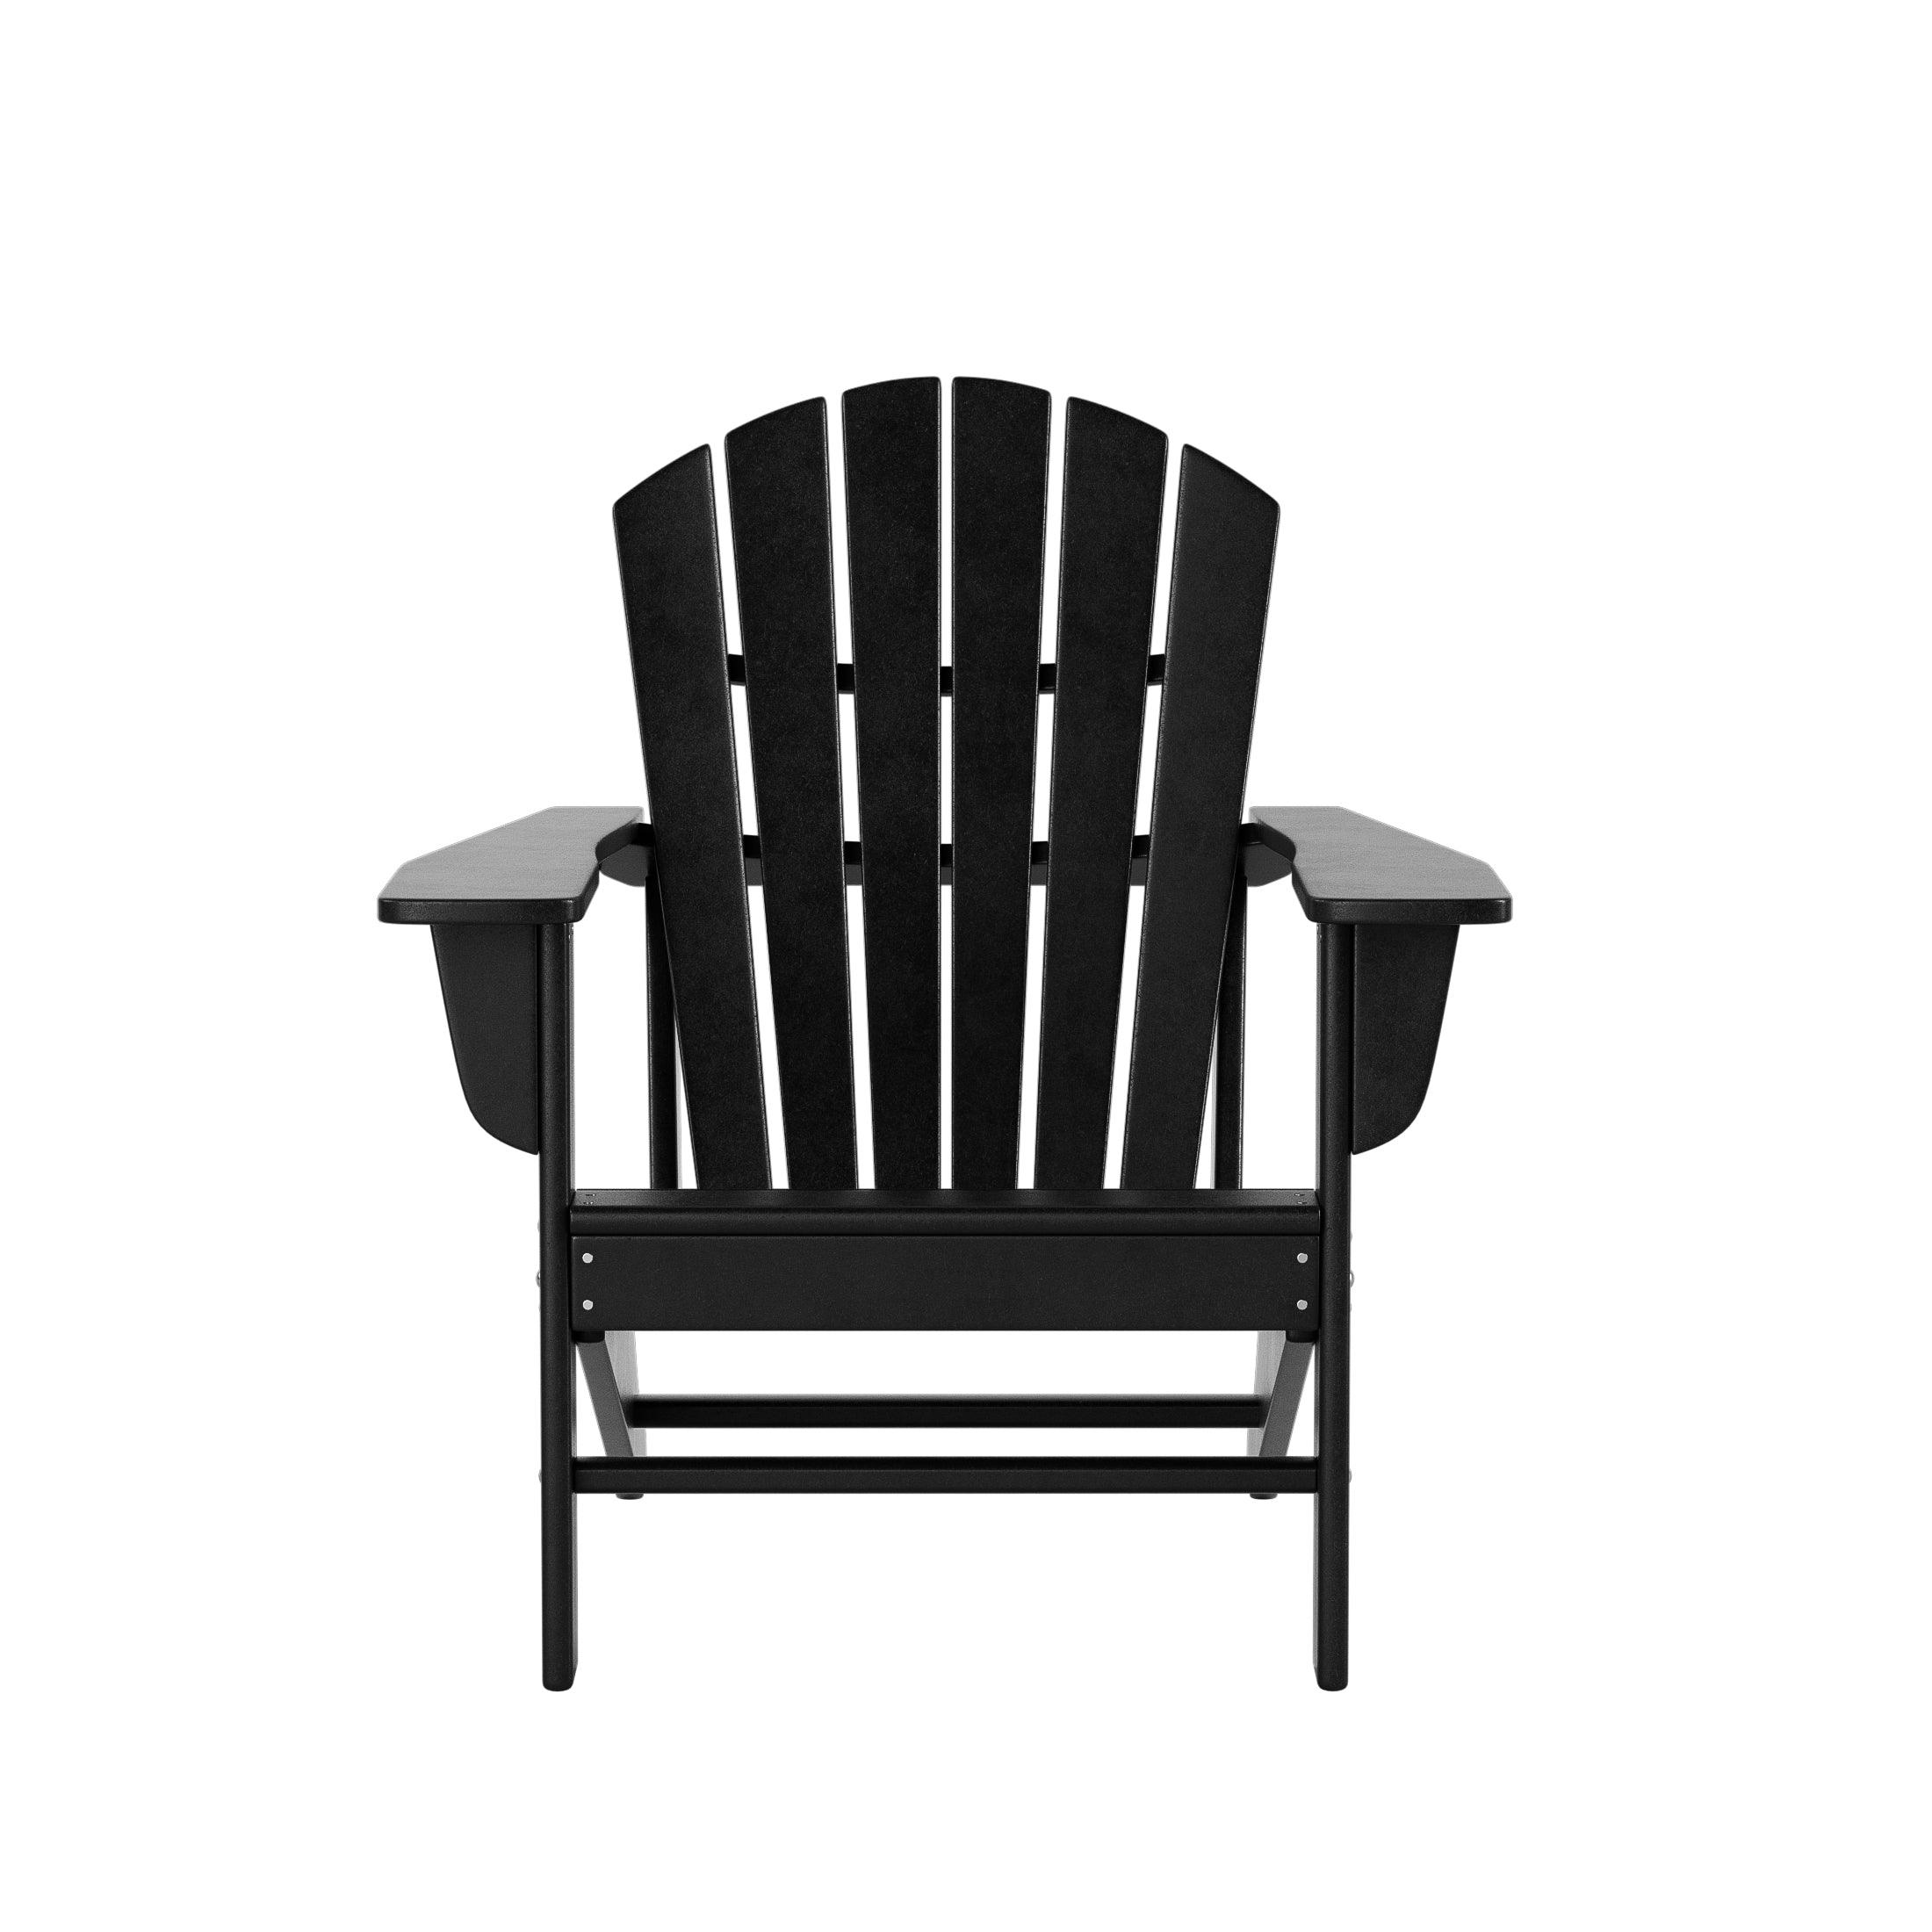 Costaelm Outdoor Adirondack Chair With Ottoman 2-Piece Set, Black